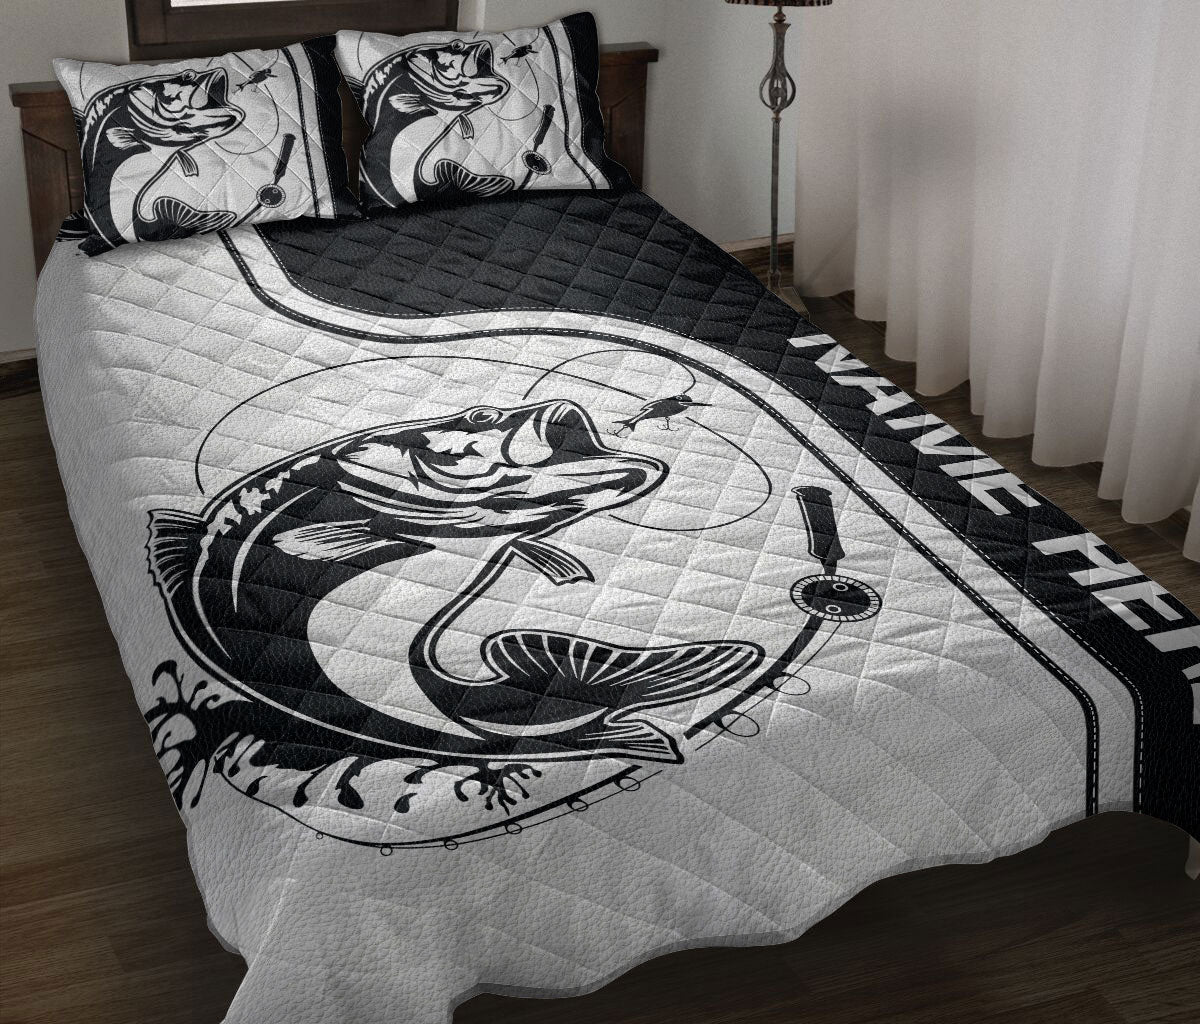 Ohaprints-Quilt-Bed-Set-Pillowcase-Fishing-Bass-Fish-B-&-W-Pattern-Fisherman-Gift-Custom-Personalized-Name-Blanket-Bedspread-Bedding-3246-Throw (55'' x 60'')